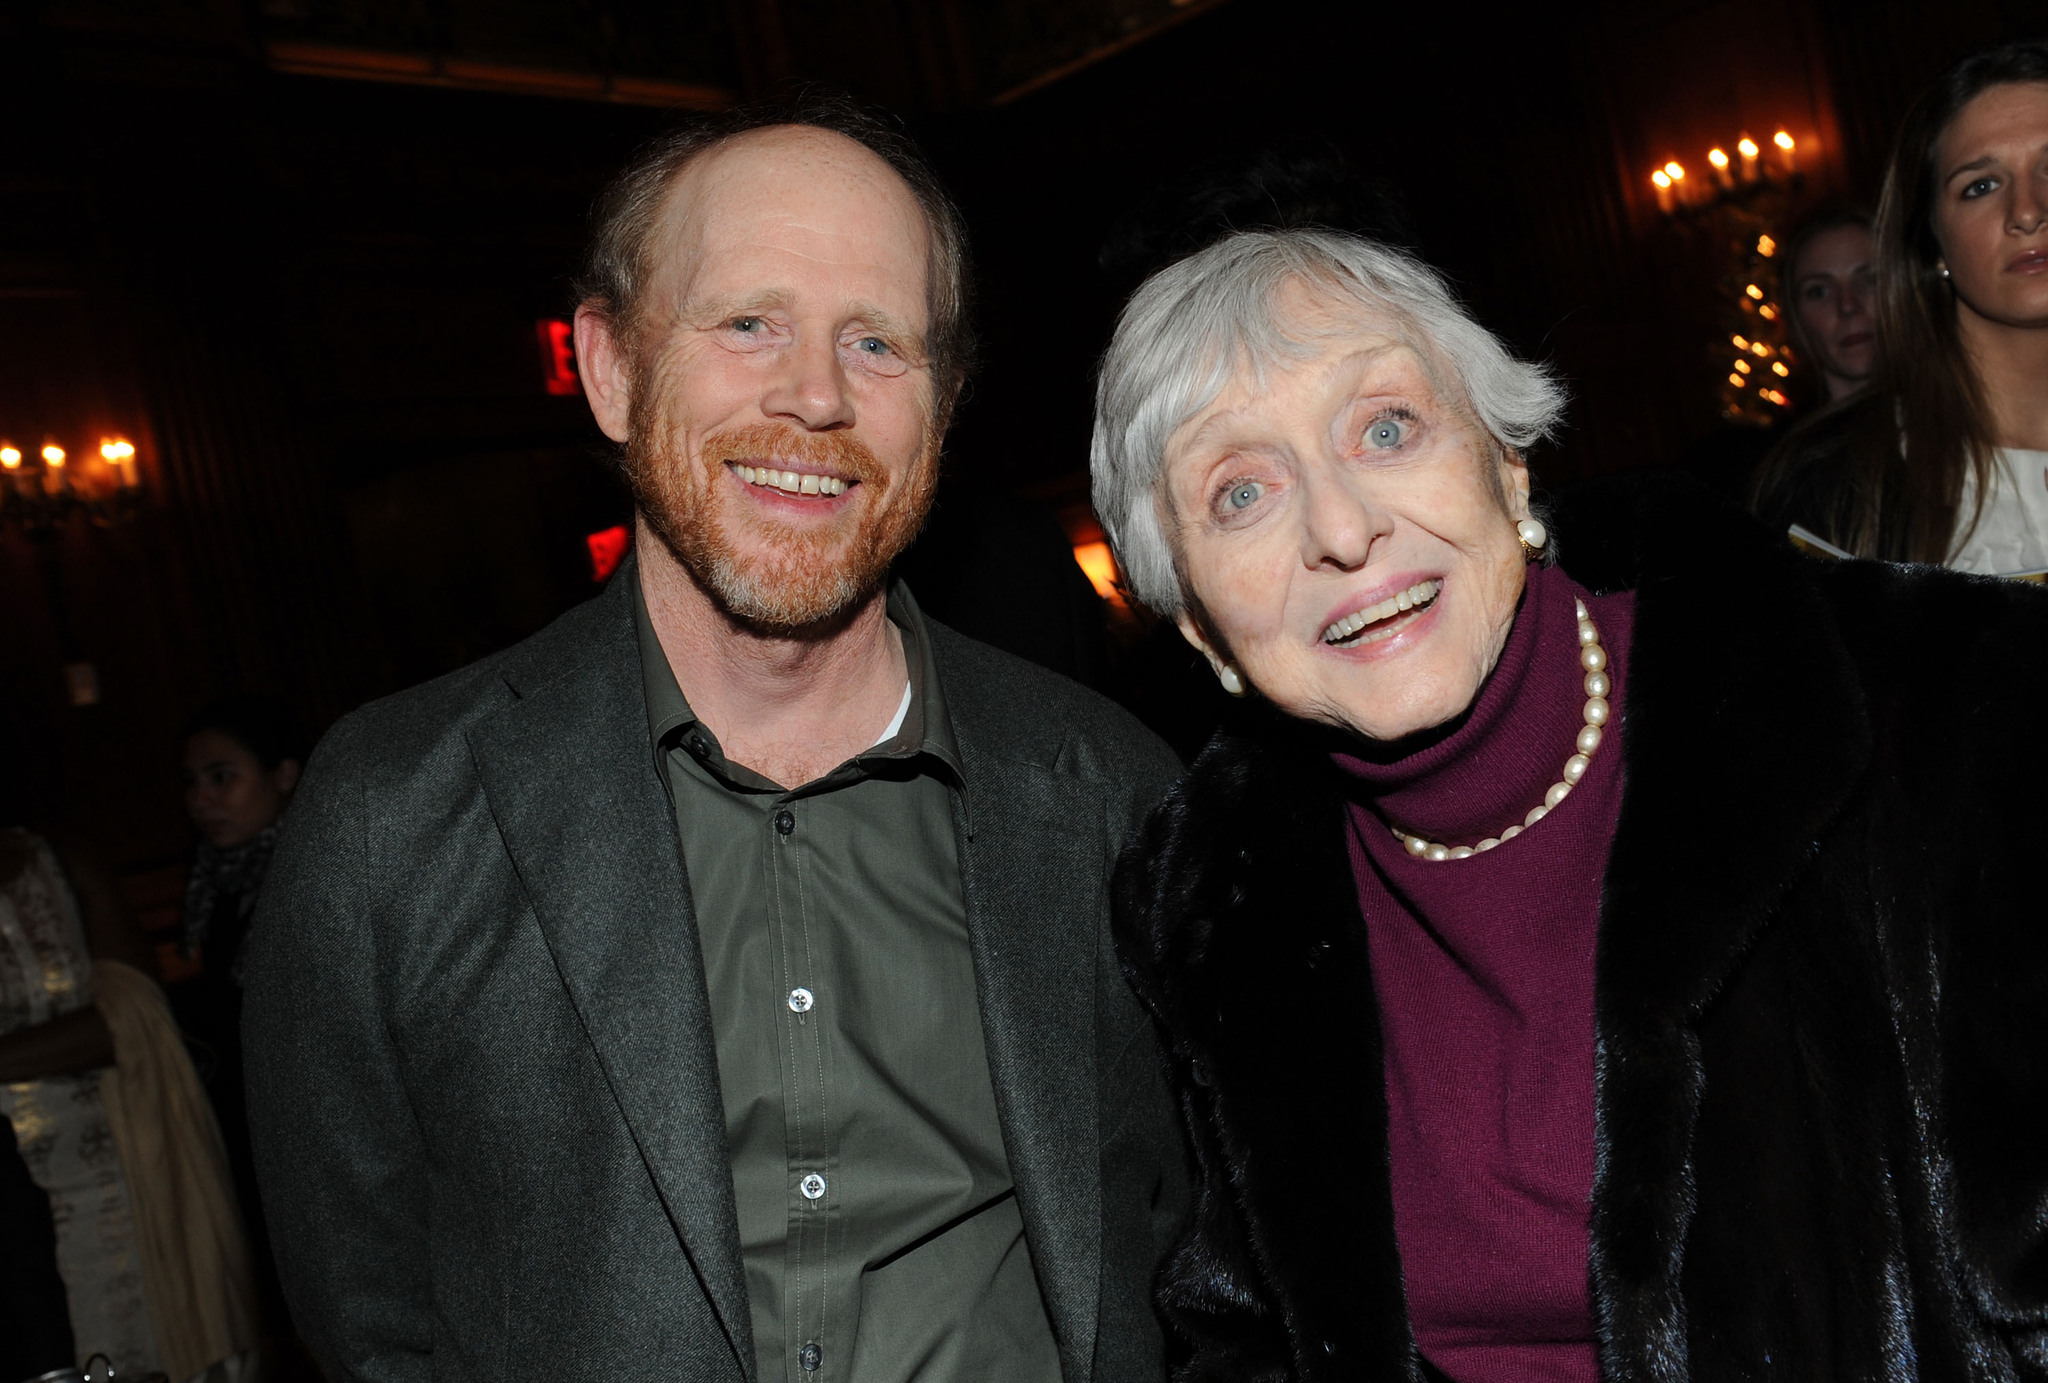 Ron Howard and Celeste Holm